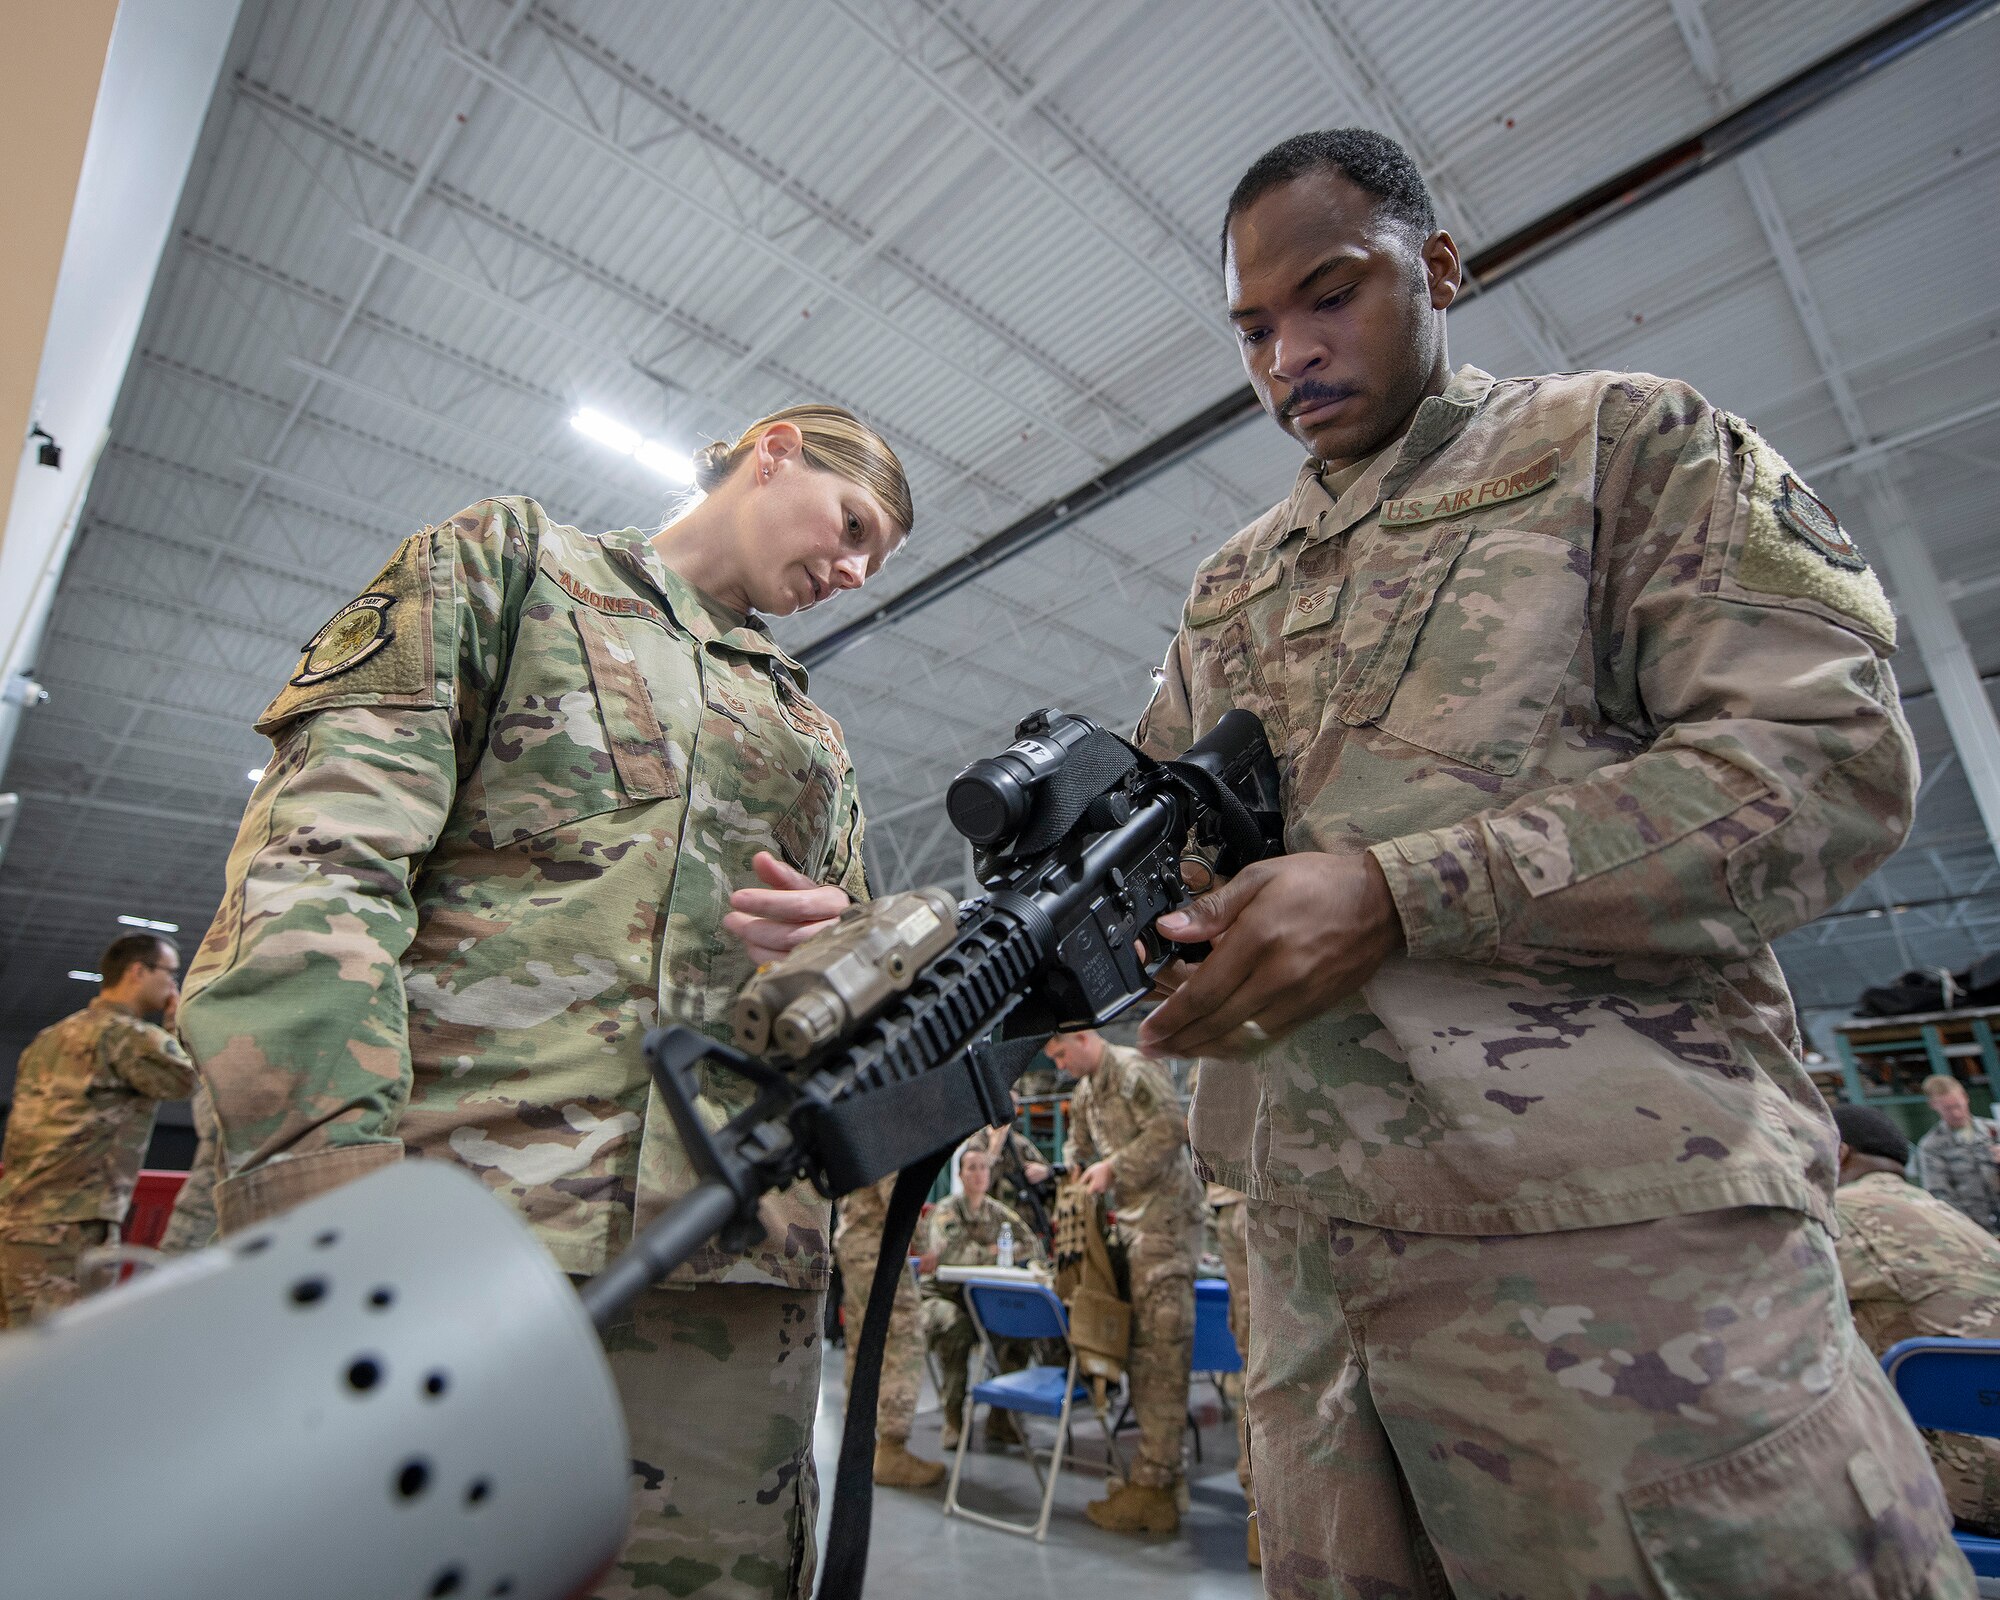 U.S. Air Force Tech. Sgt. Cicily Amonett, left, 321st Contingency Response Squadron assistant flight chief, assists as Staff Sgt. Jarrod Perry, 321st CRS crew chief, clears his weapon during deployment processing Sept. 14, 2019, at Travis Air Force Base, California. Contingency response forces from the U.S. and Royal Australian Air Forces staged at Travis AFB before deploying in support of exercise Mobility Guardian 2019. MG19 is Air Mobility Command’s flagship exercise for large-scale rapid global mobility operations. Forty-six U.S. aircraft will join aircraft from 29 international partners, along with more than 4,000 U.S. and international Air Force, Army, Navy and Marine Corps aviators. (U.S. Air Force photo by Louis Briscese)